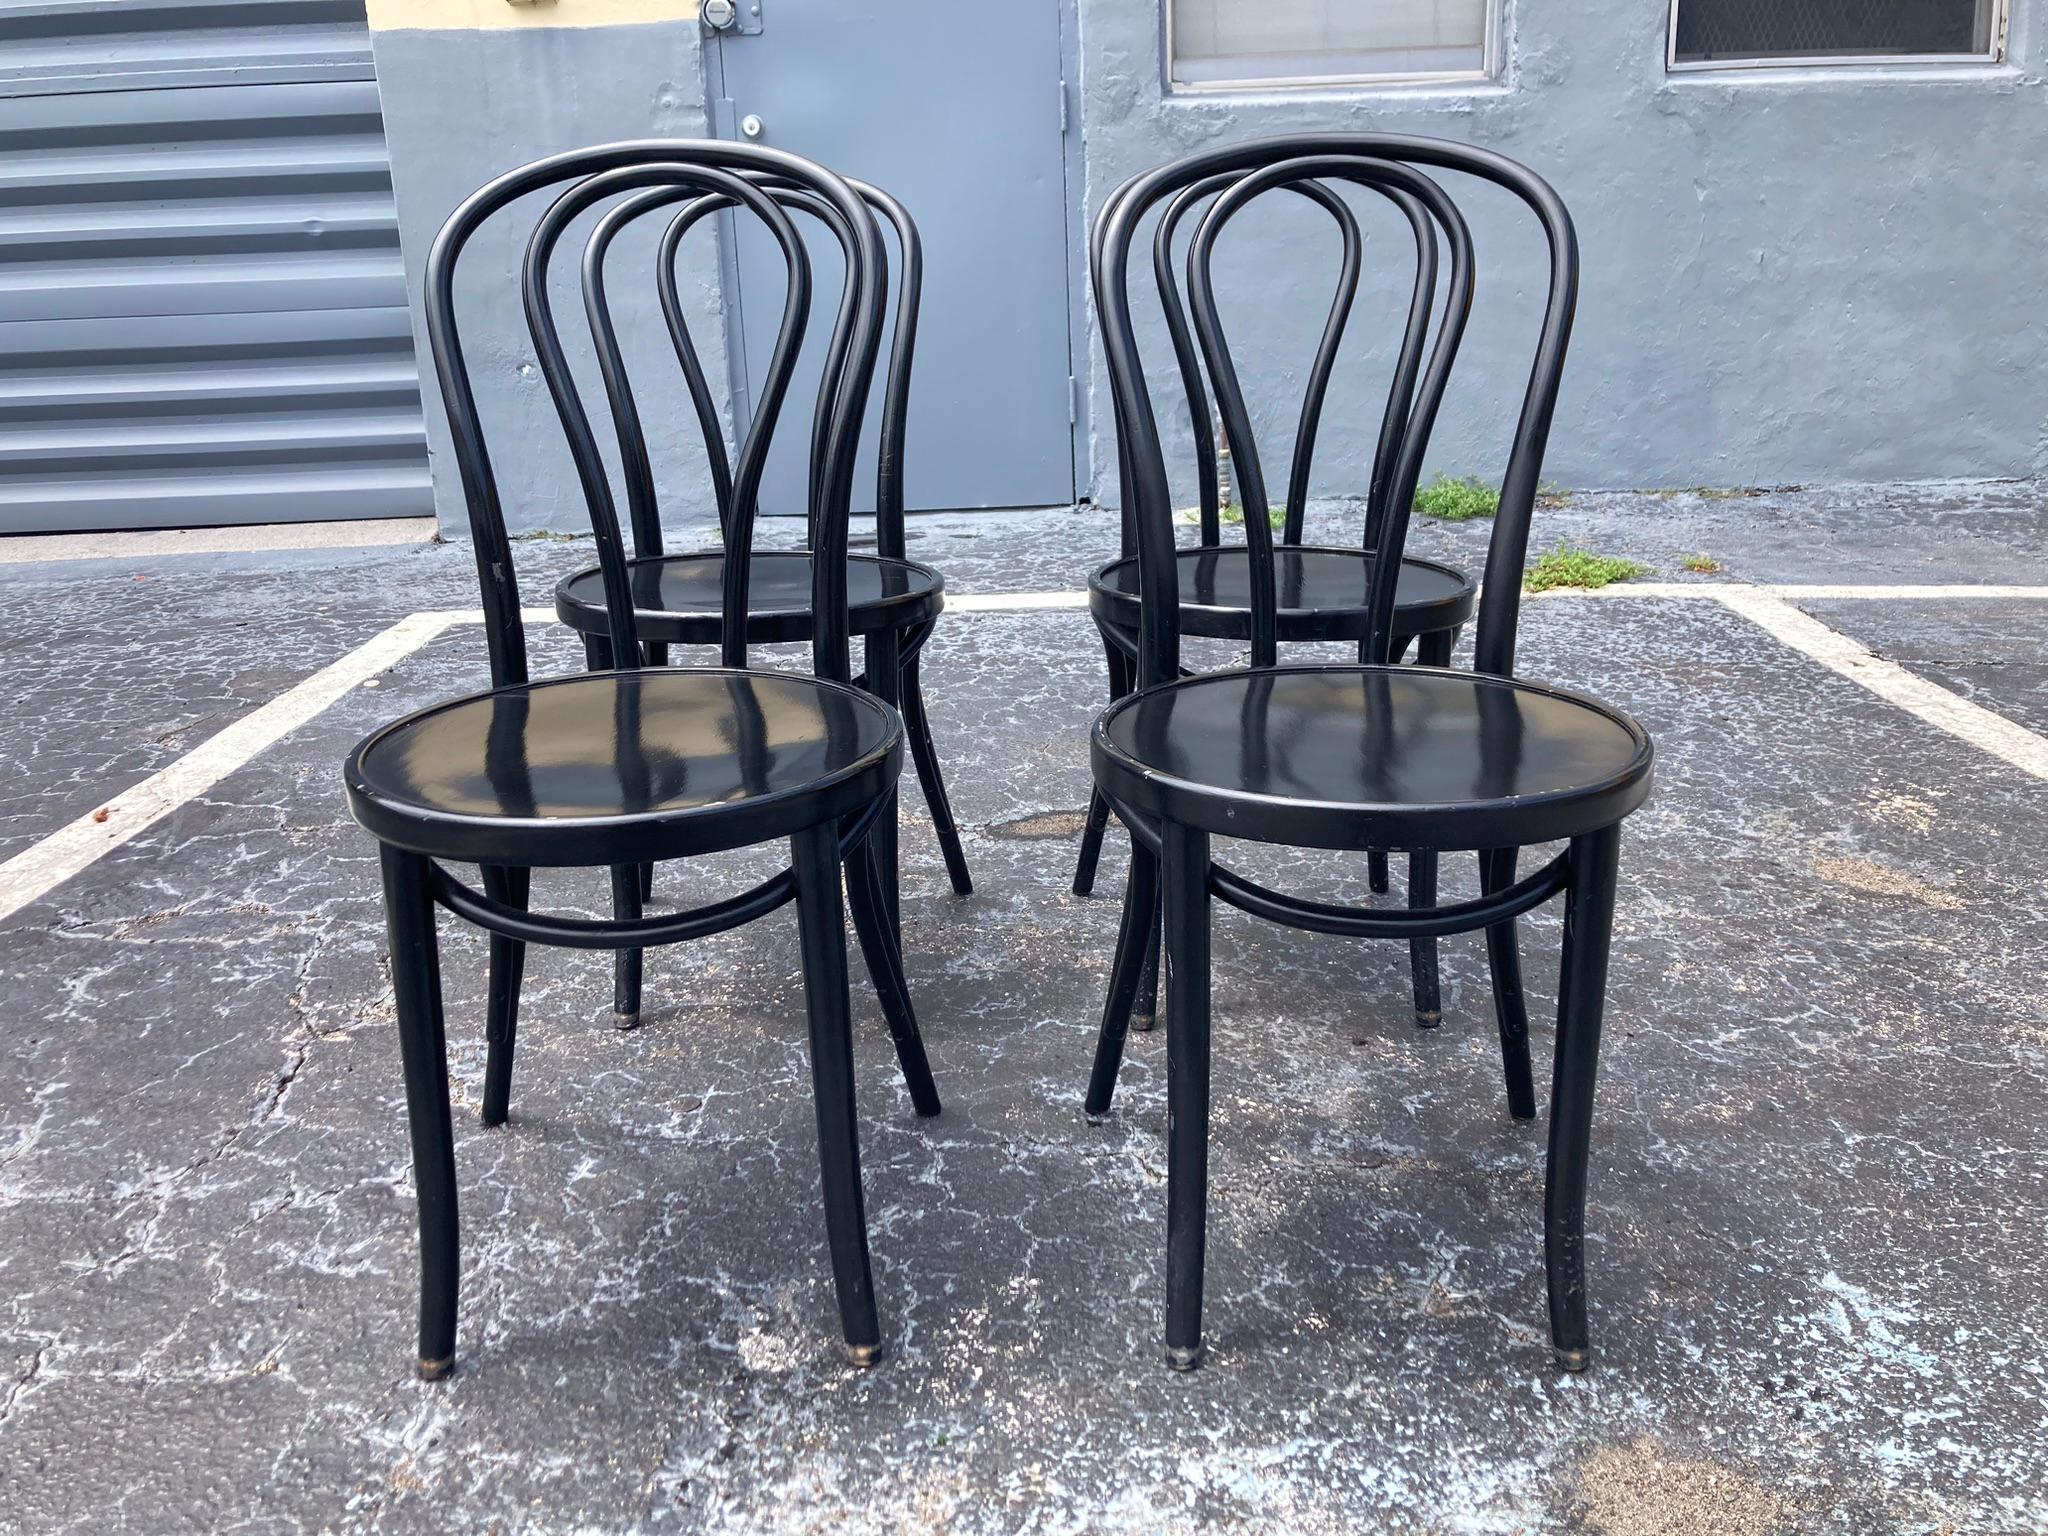 Set of Four Dining Chairs Designed by Michael Thonet No.18, in total ten chairs available.